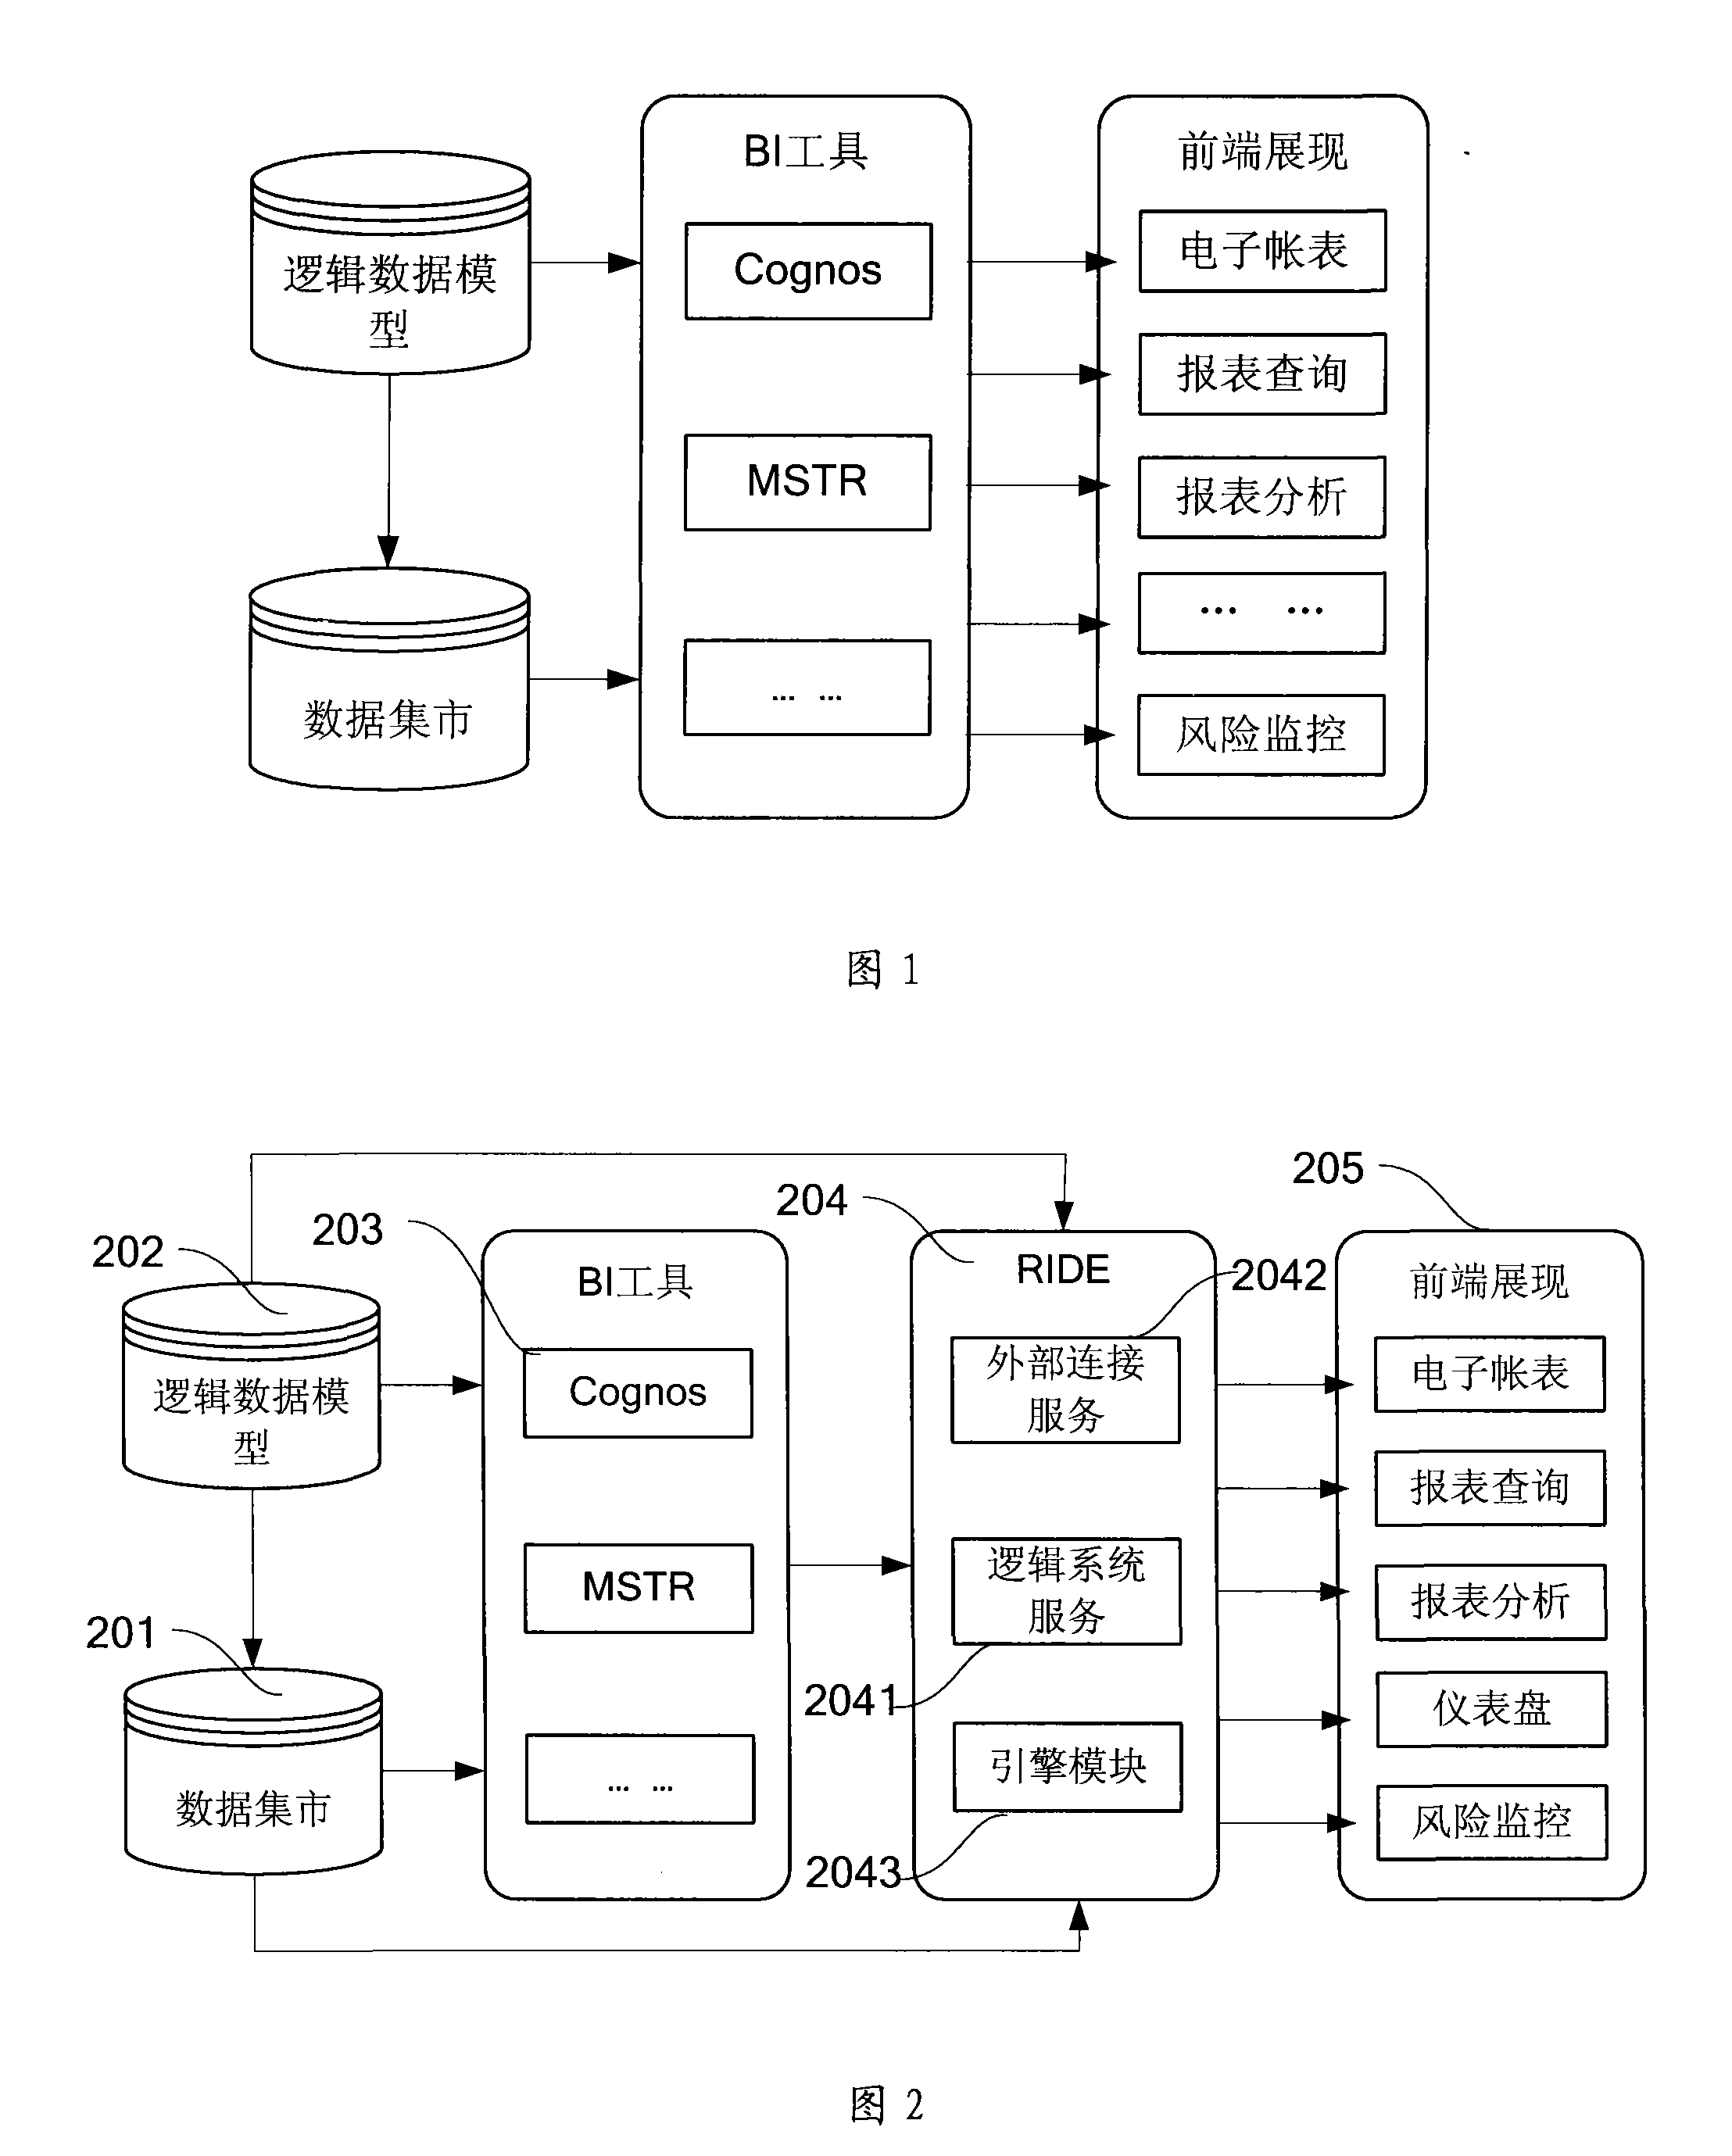 Heterogeneous report form integration and centralized management device and system